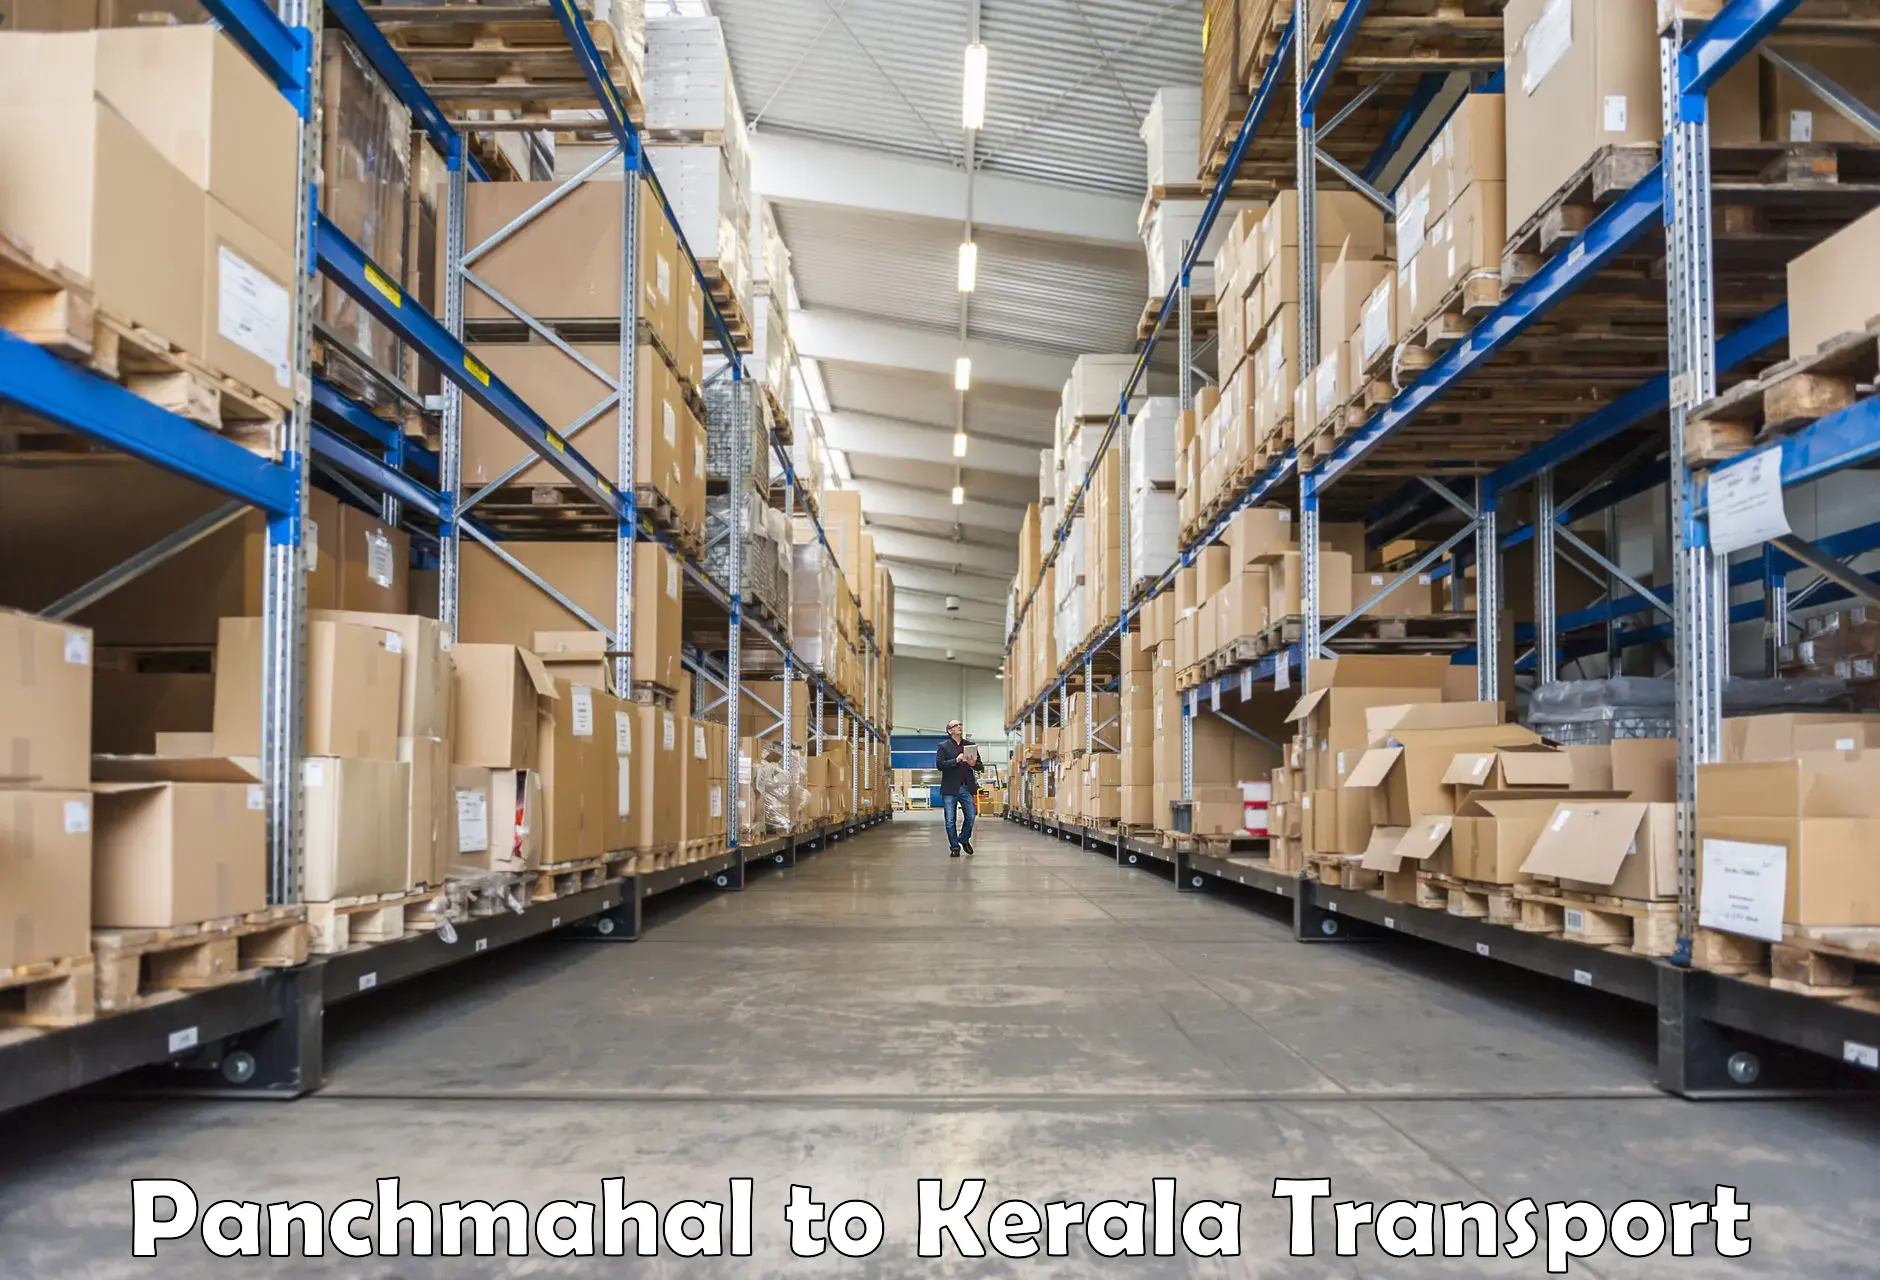 Truck transport companies in India Panchmahal to Kochi